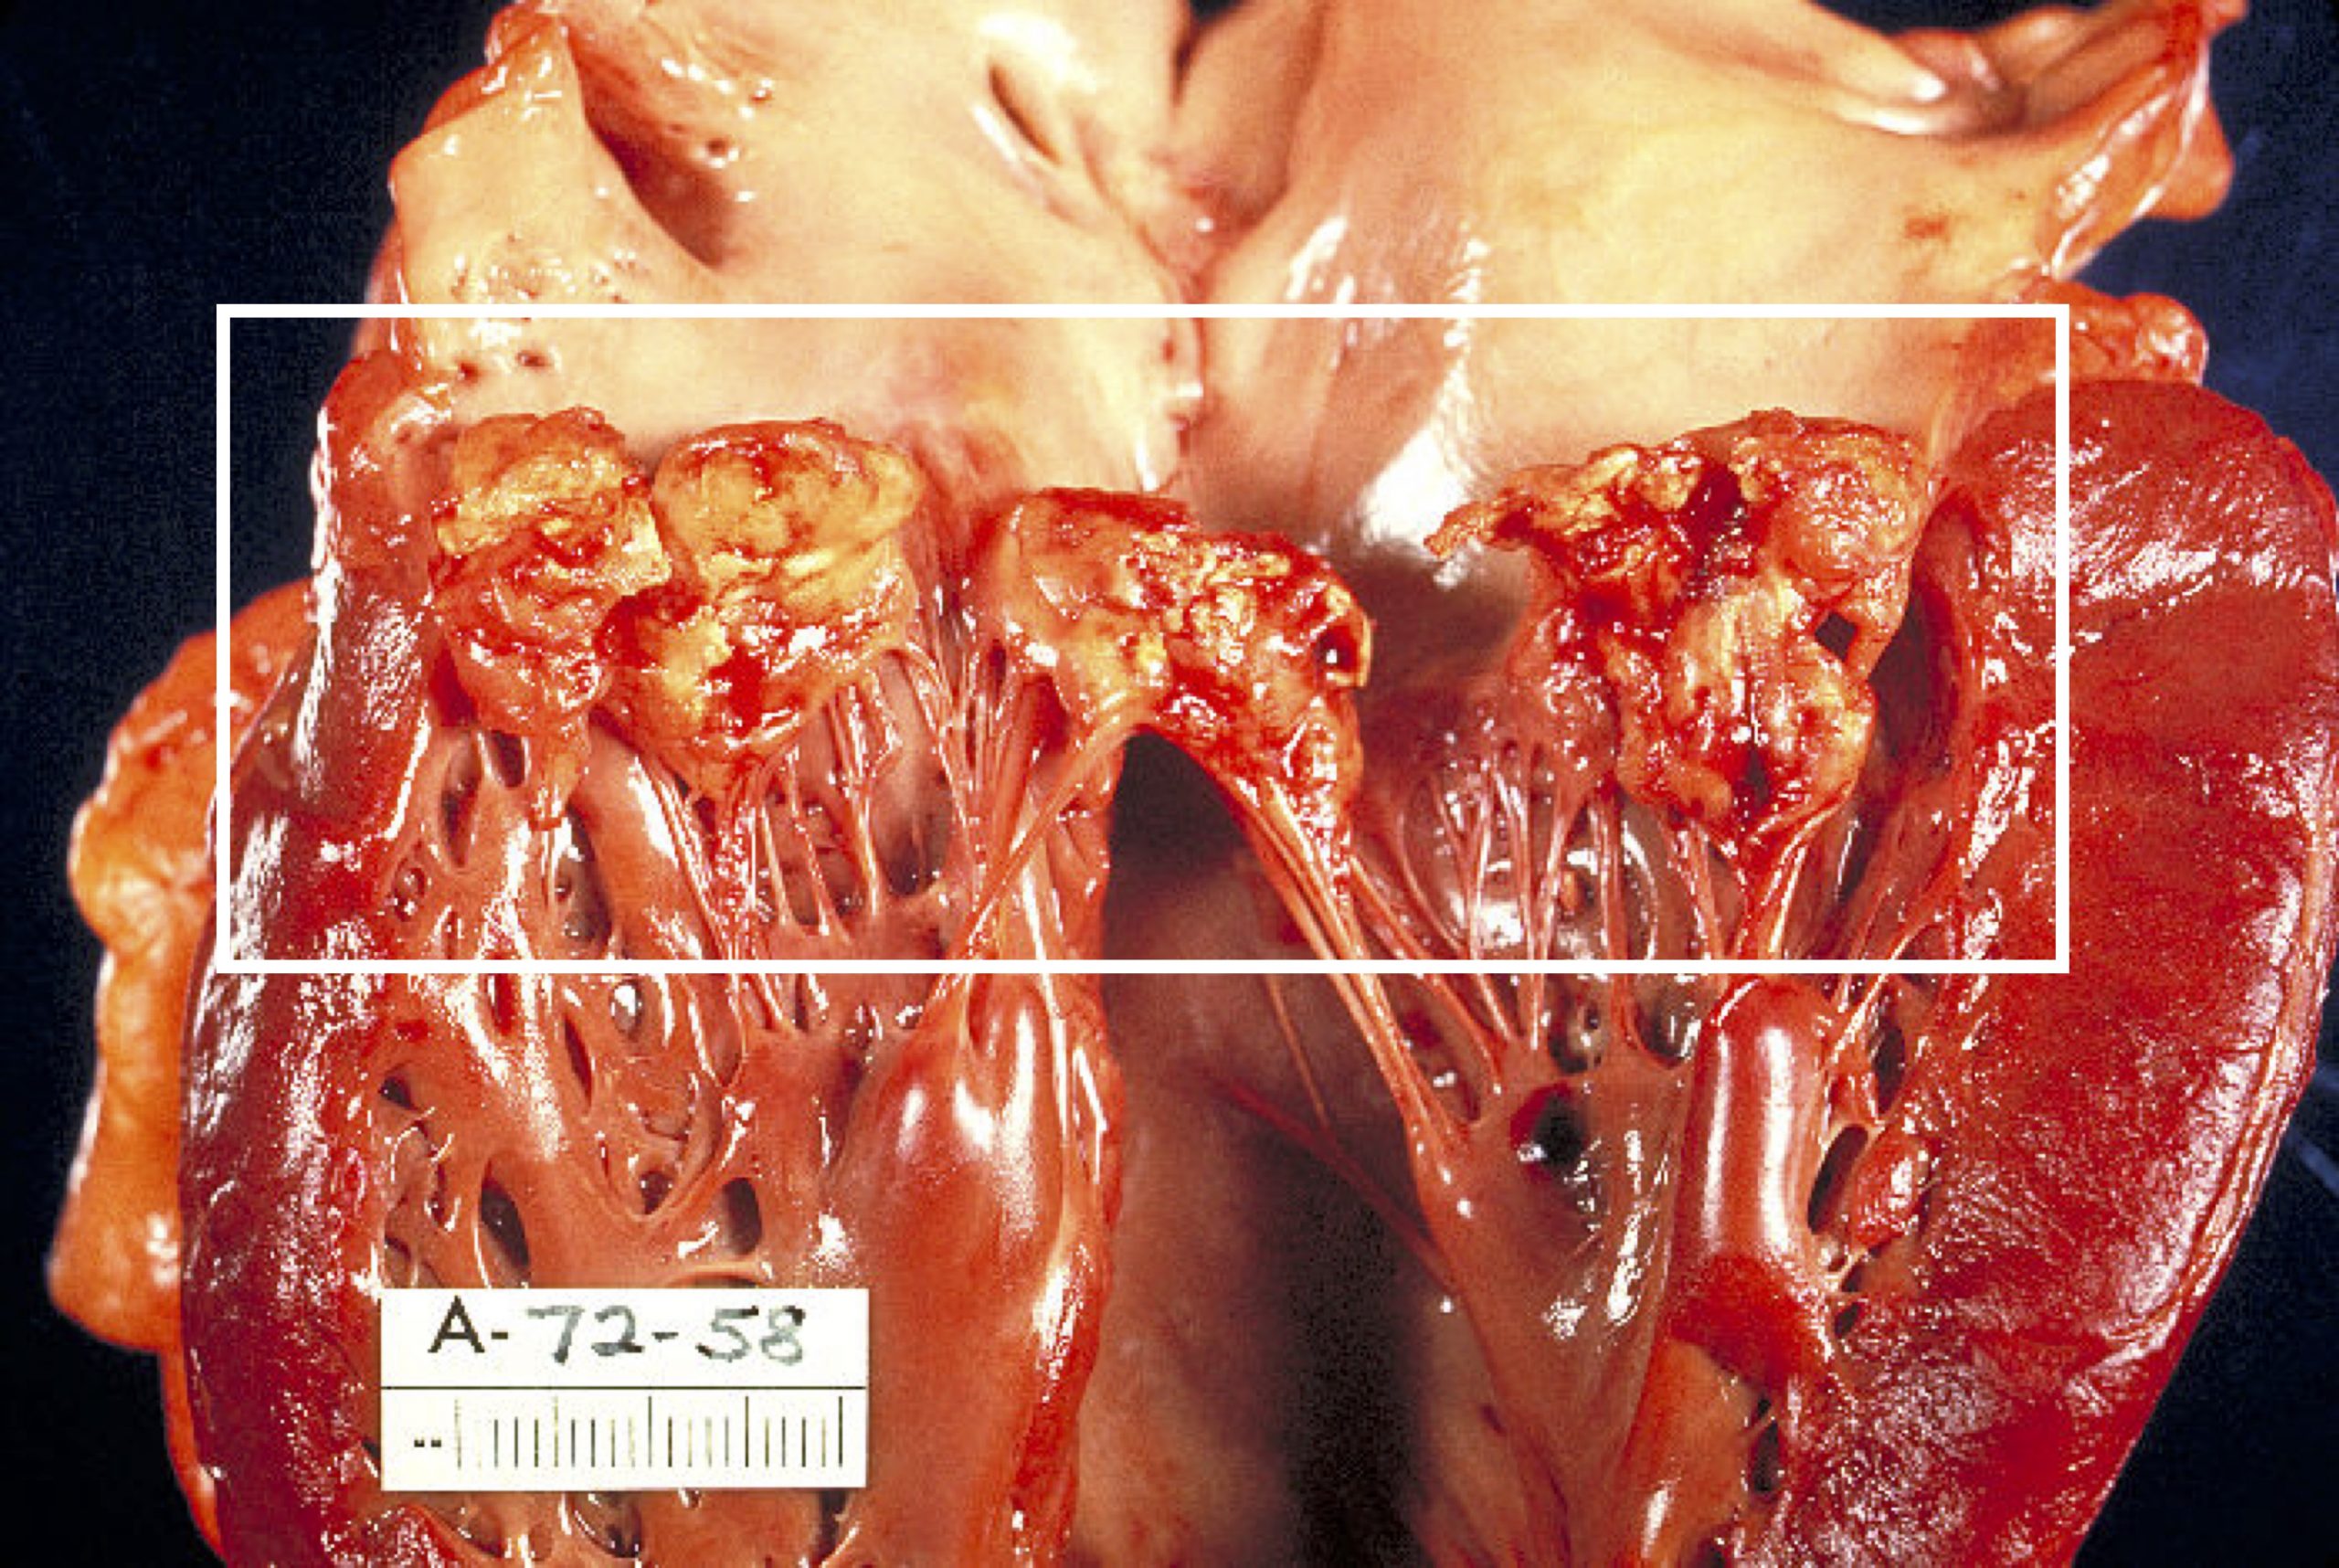 A photograph shows a gross anatomy view of a sectioned heart. The heart is cut in half (coronal plane) at the level of the valves. The valve leaflets have lost their normal smooth appearance and have lumps of inflamed tissue on them giving them a bumpy, rough appearance.